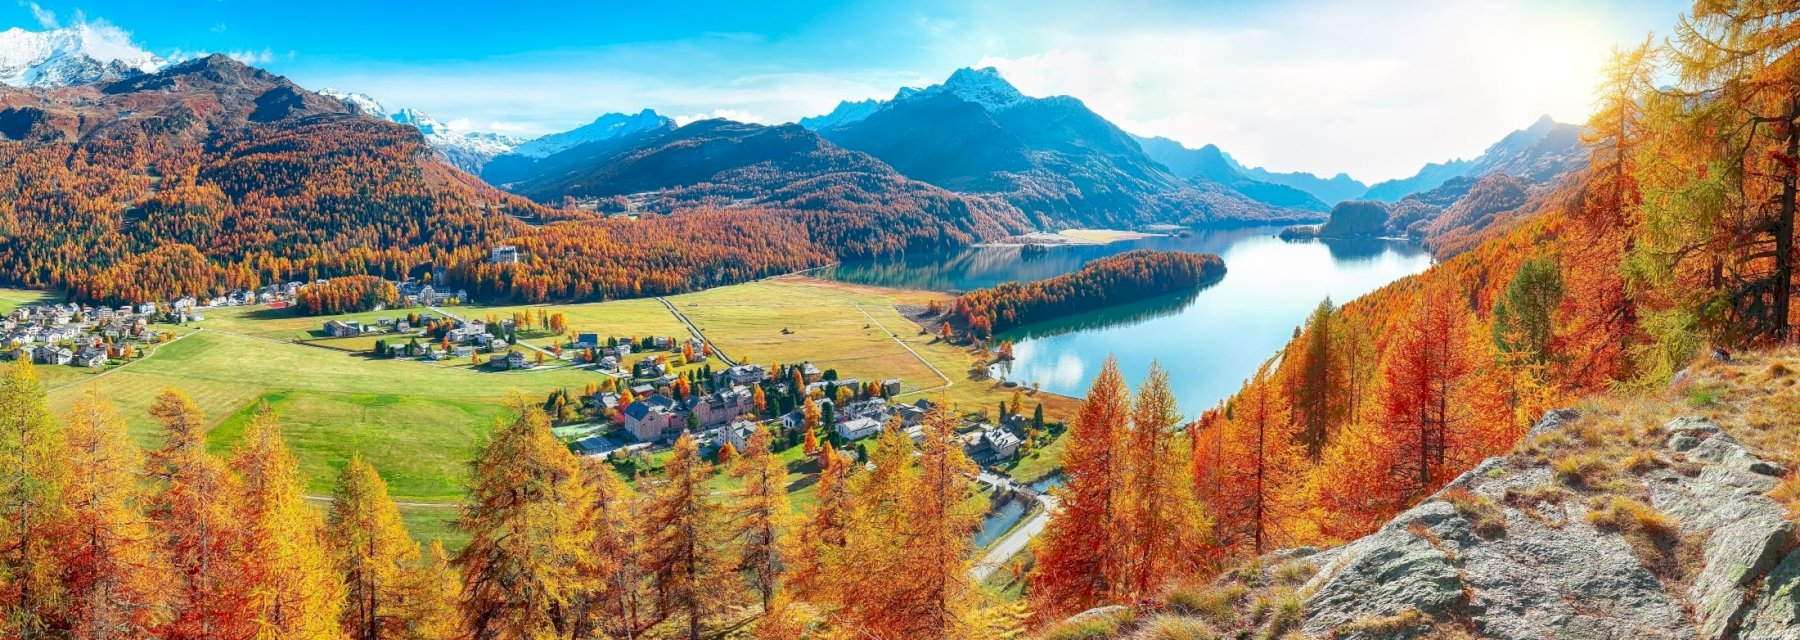 5 glorious destinations for this Autumn